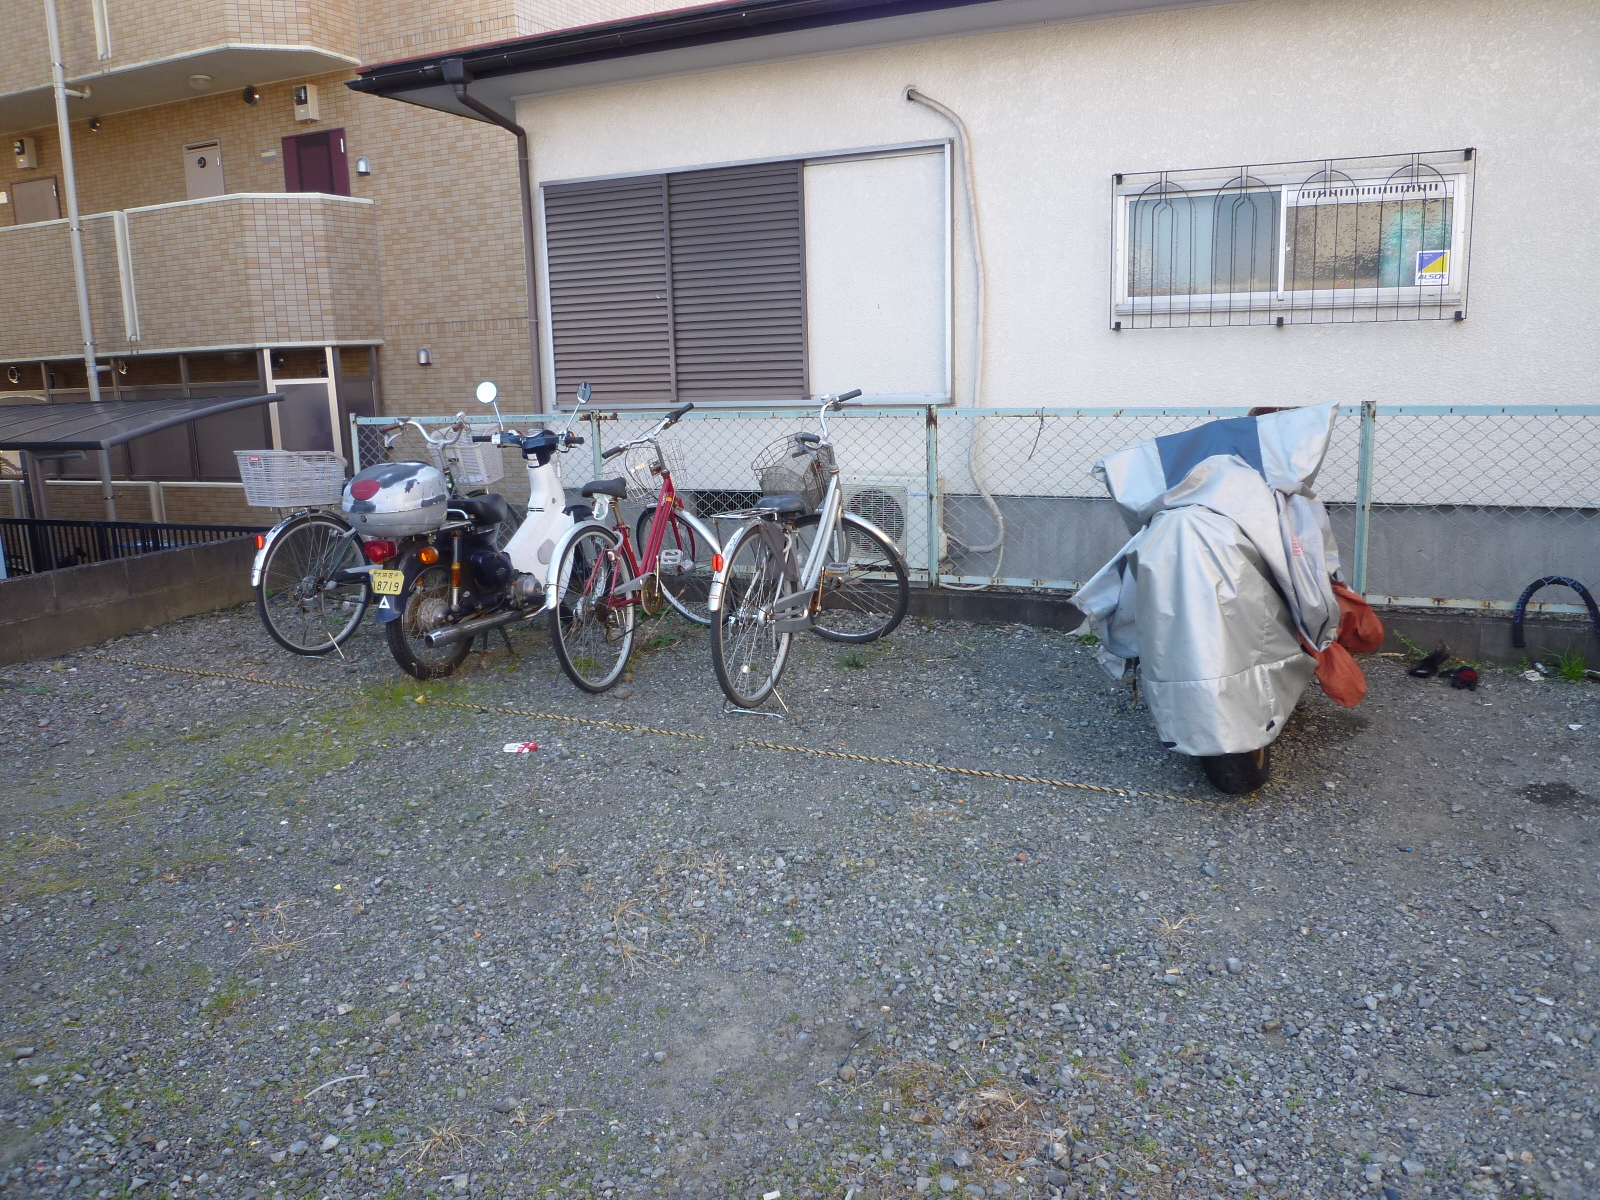 Parking lot. Bicycle-parking space, Please use Yuzuria'.